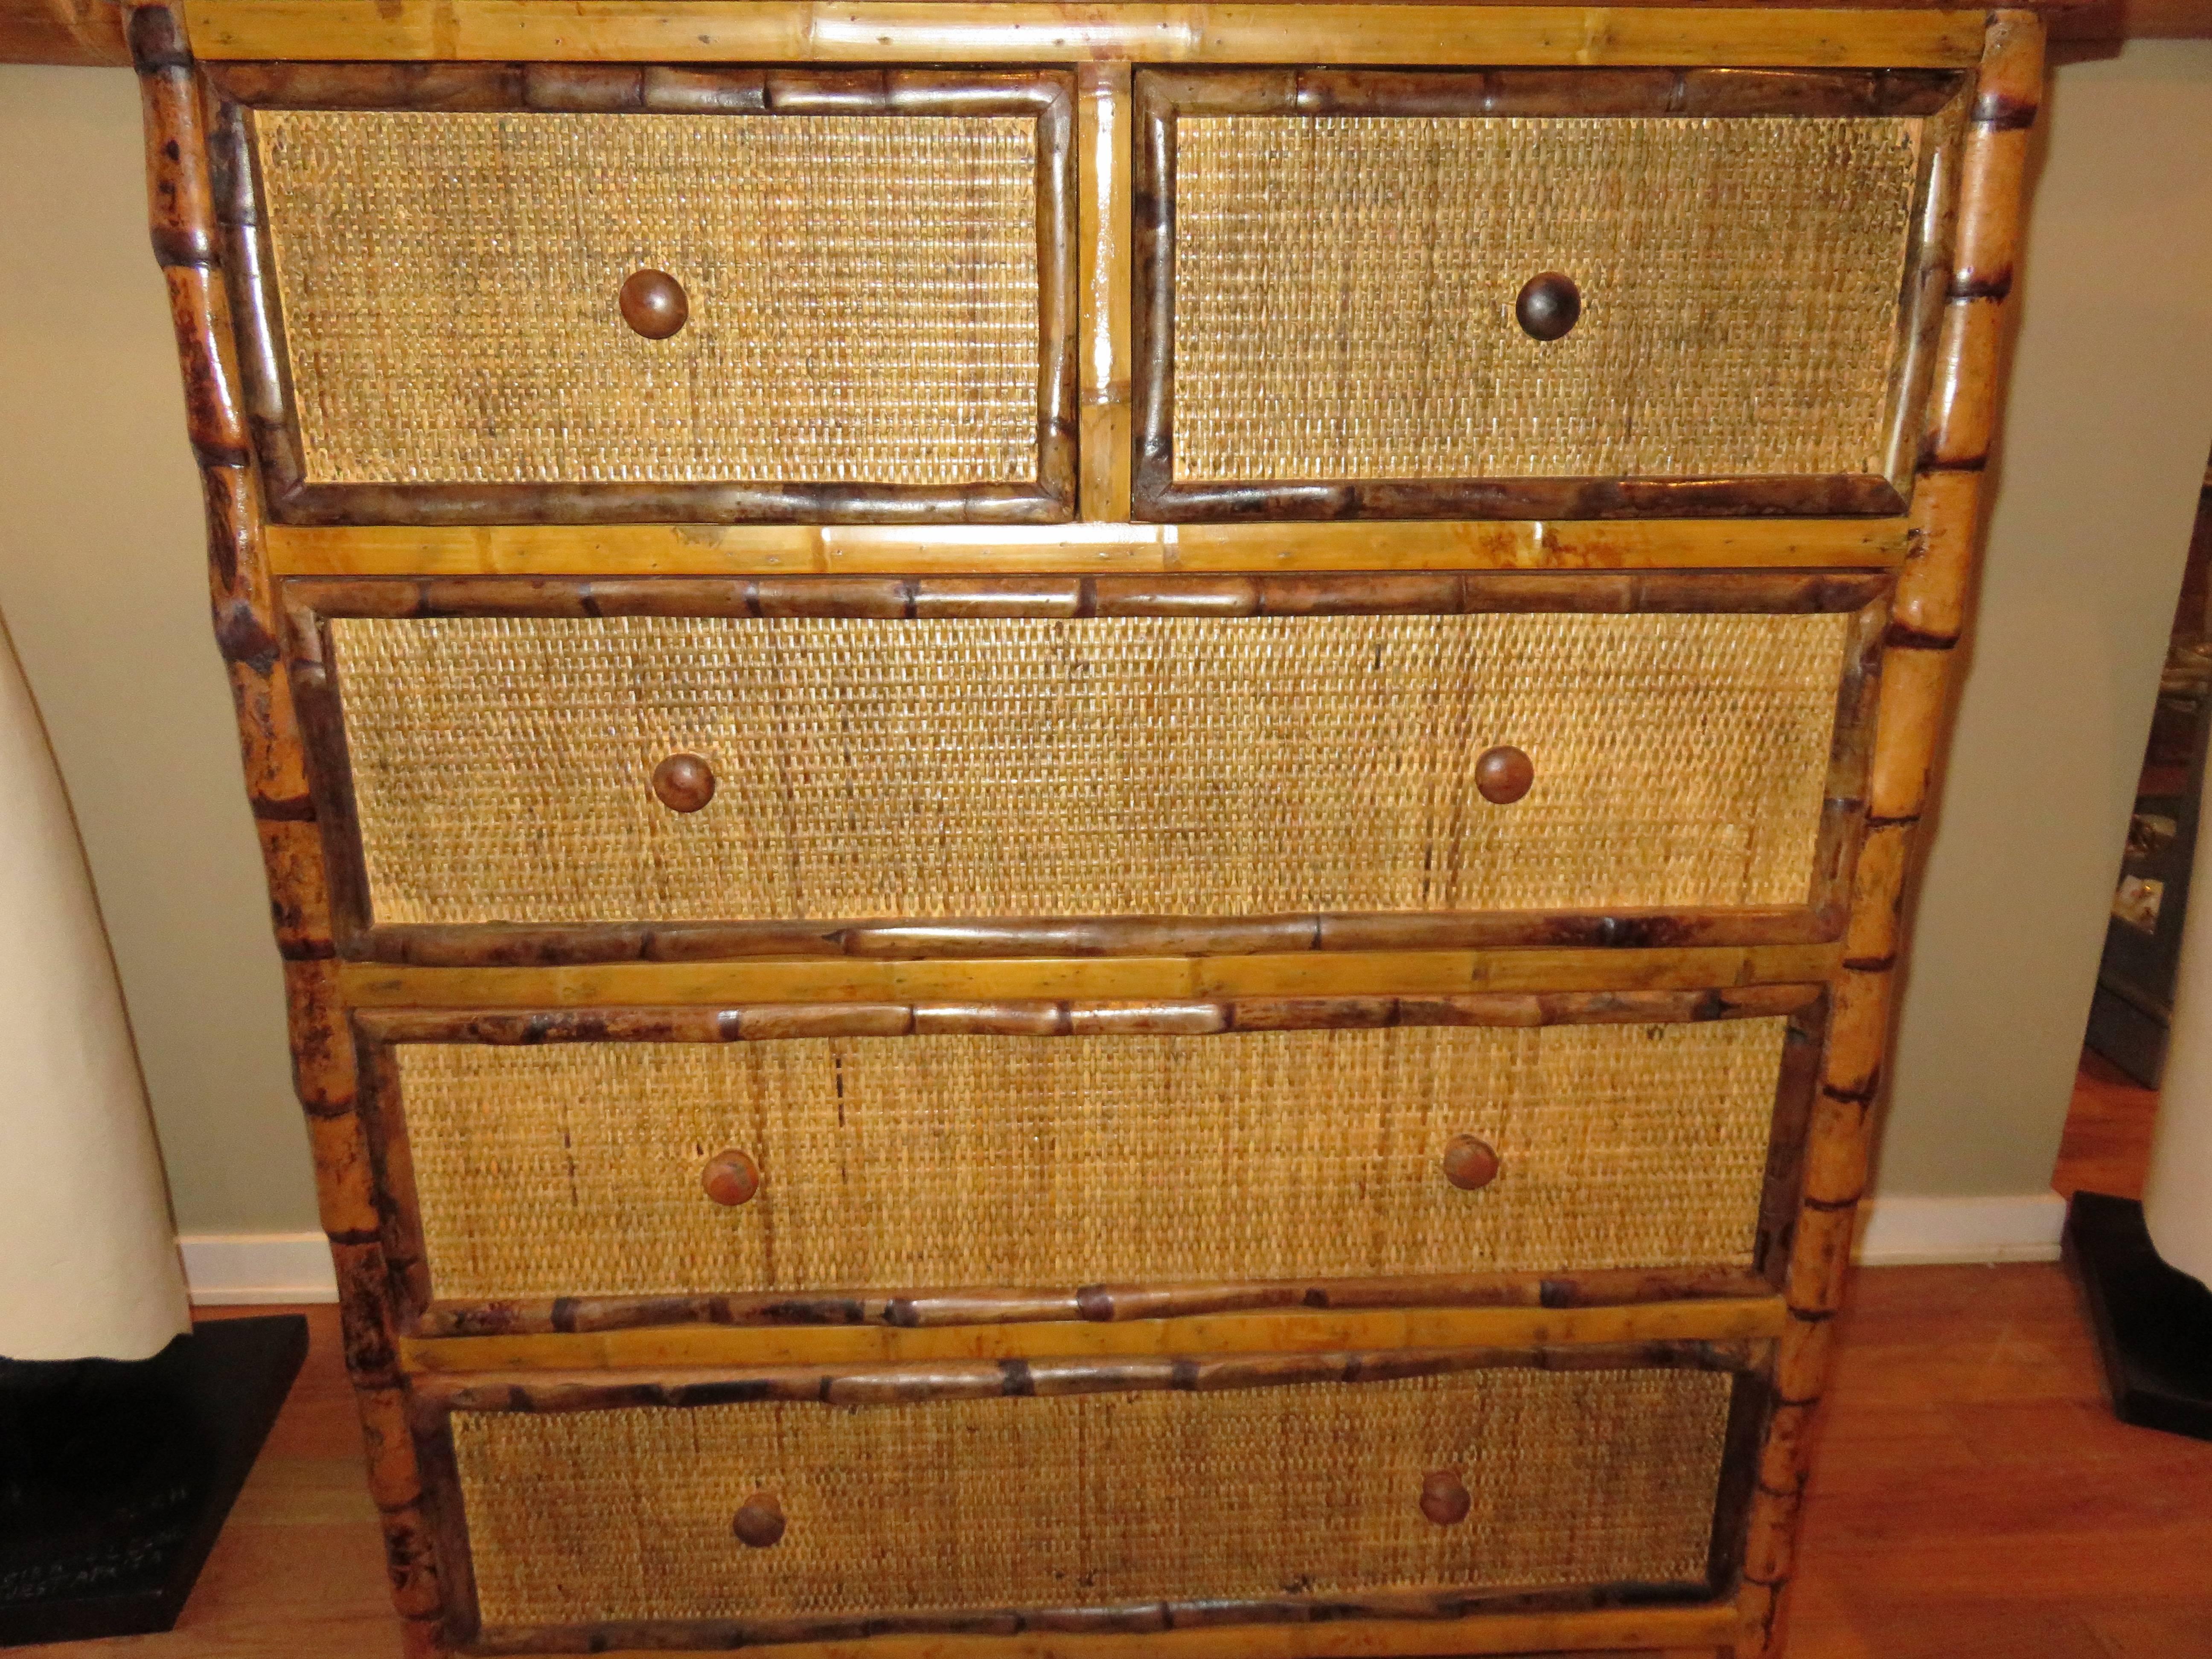 Bermudian Bamboo and Cane  British Colonial Style Dresser or Drawers